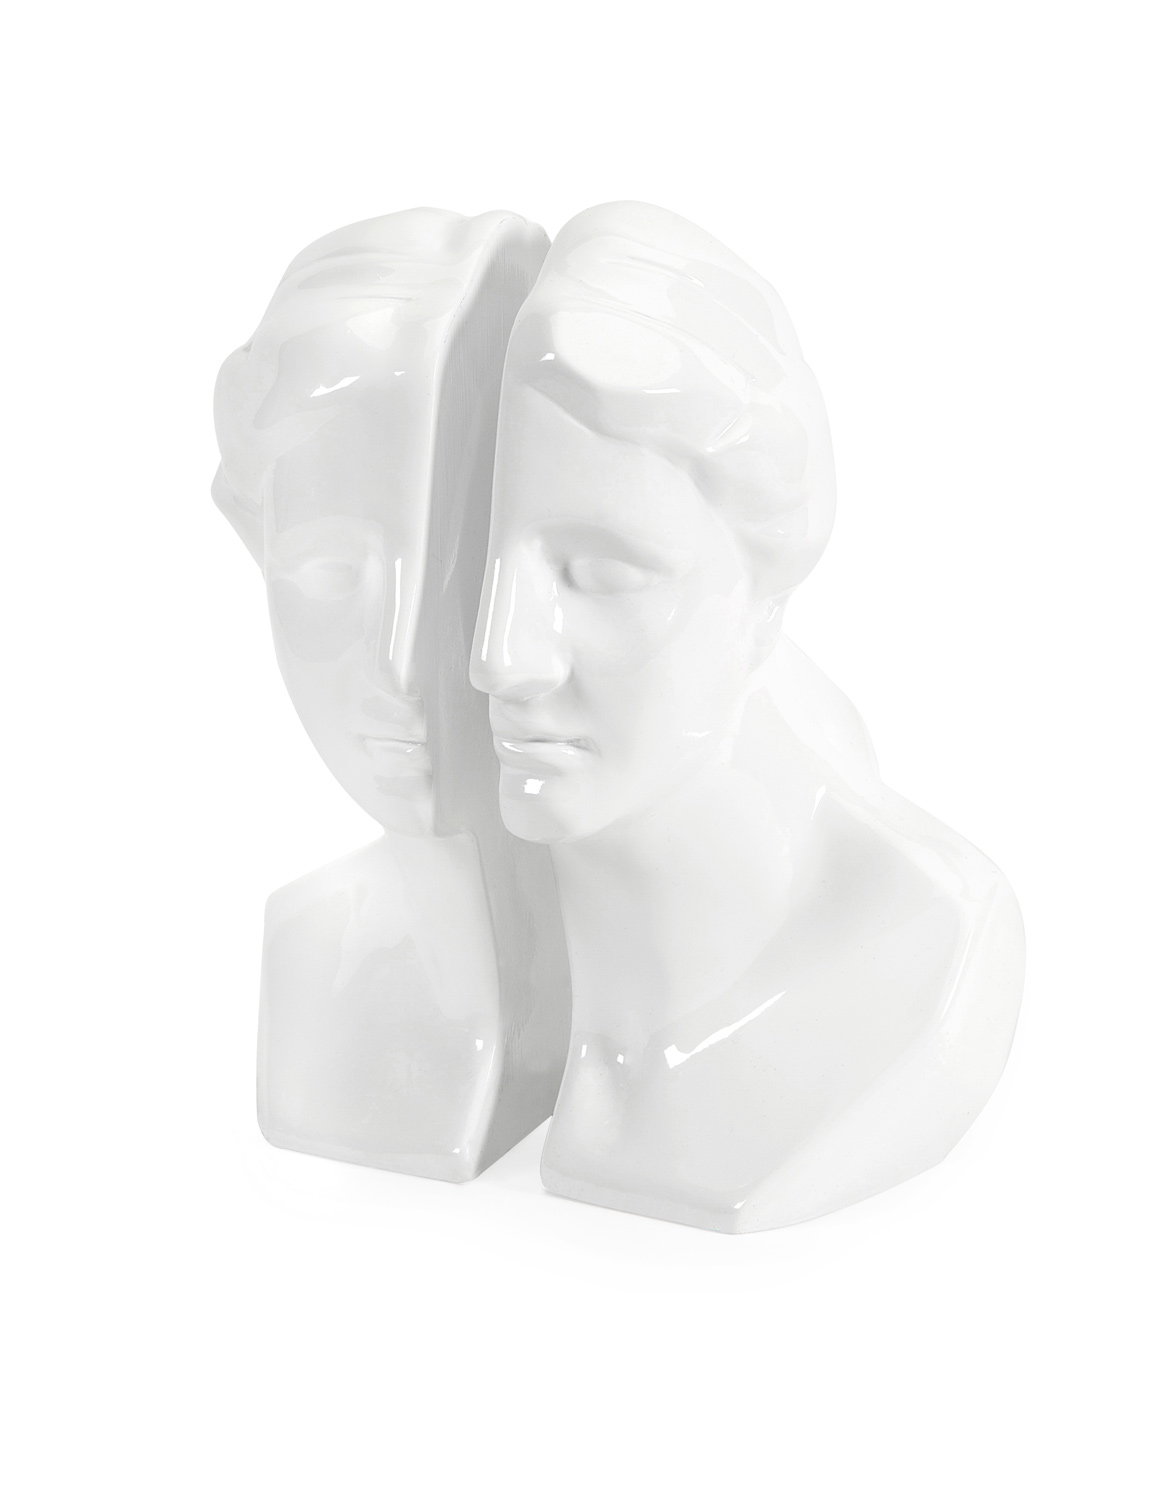 IMAX White Greek Lady Bookends - Set of 2